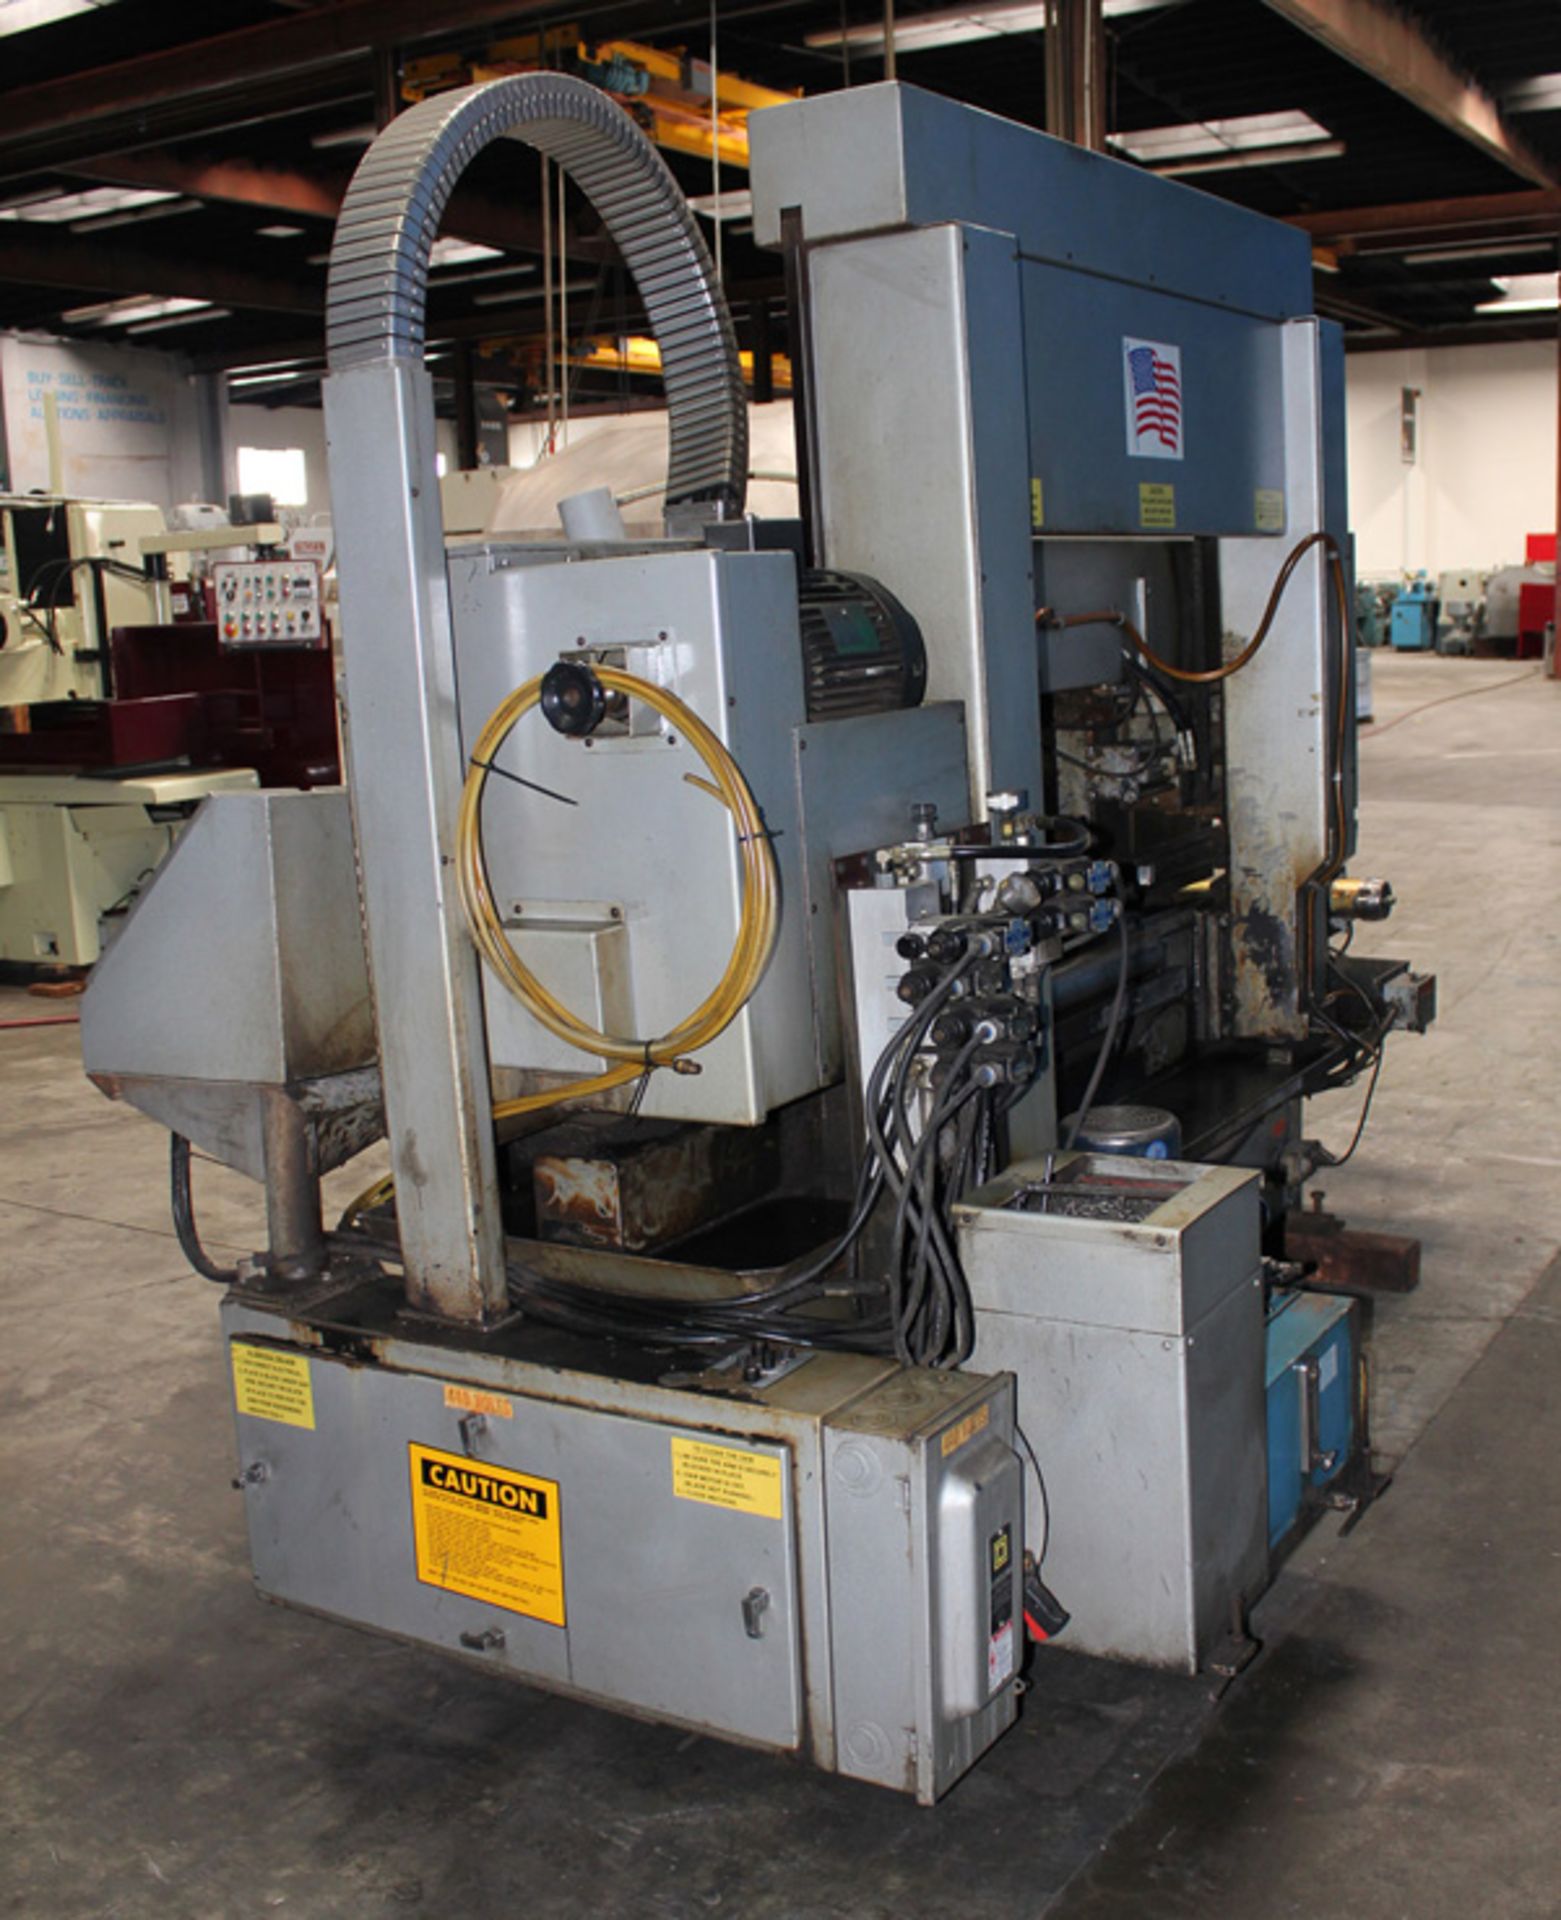 1996 HEM Semi-Automatic Horizontal Bandsaw, 18" x 20", Mdl: H130 HM- DC, S/N: 524196, Located In: - Image 3 of 8